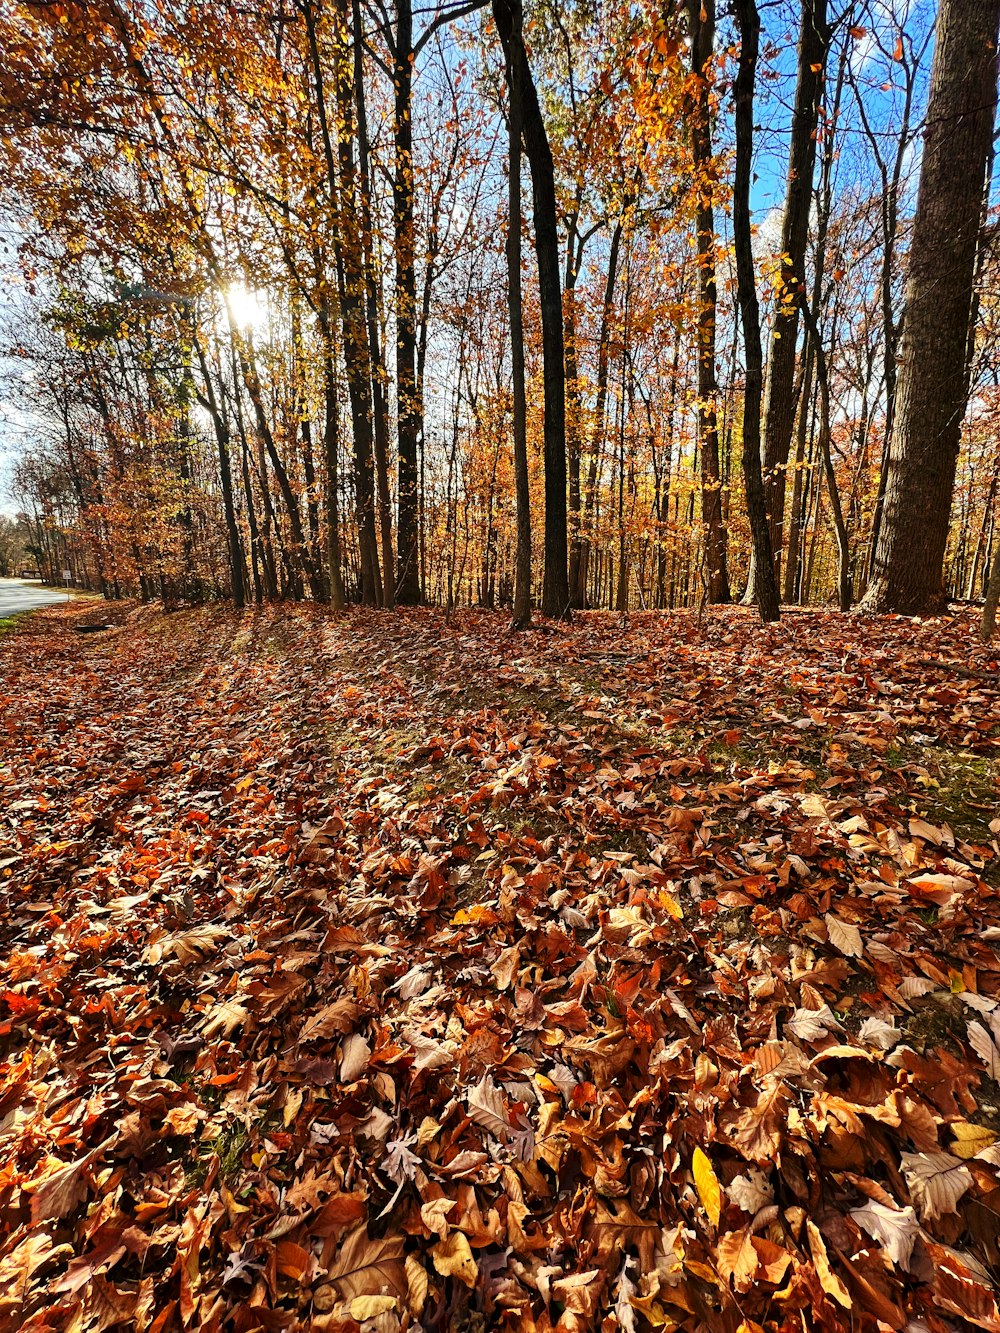 a forest of fallen leaves